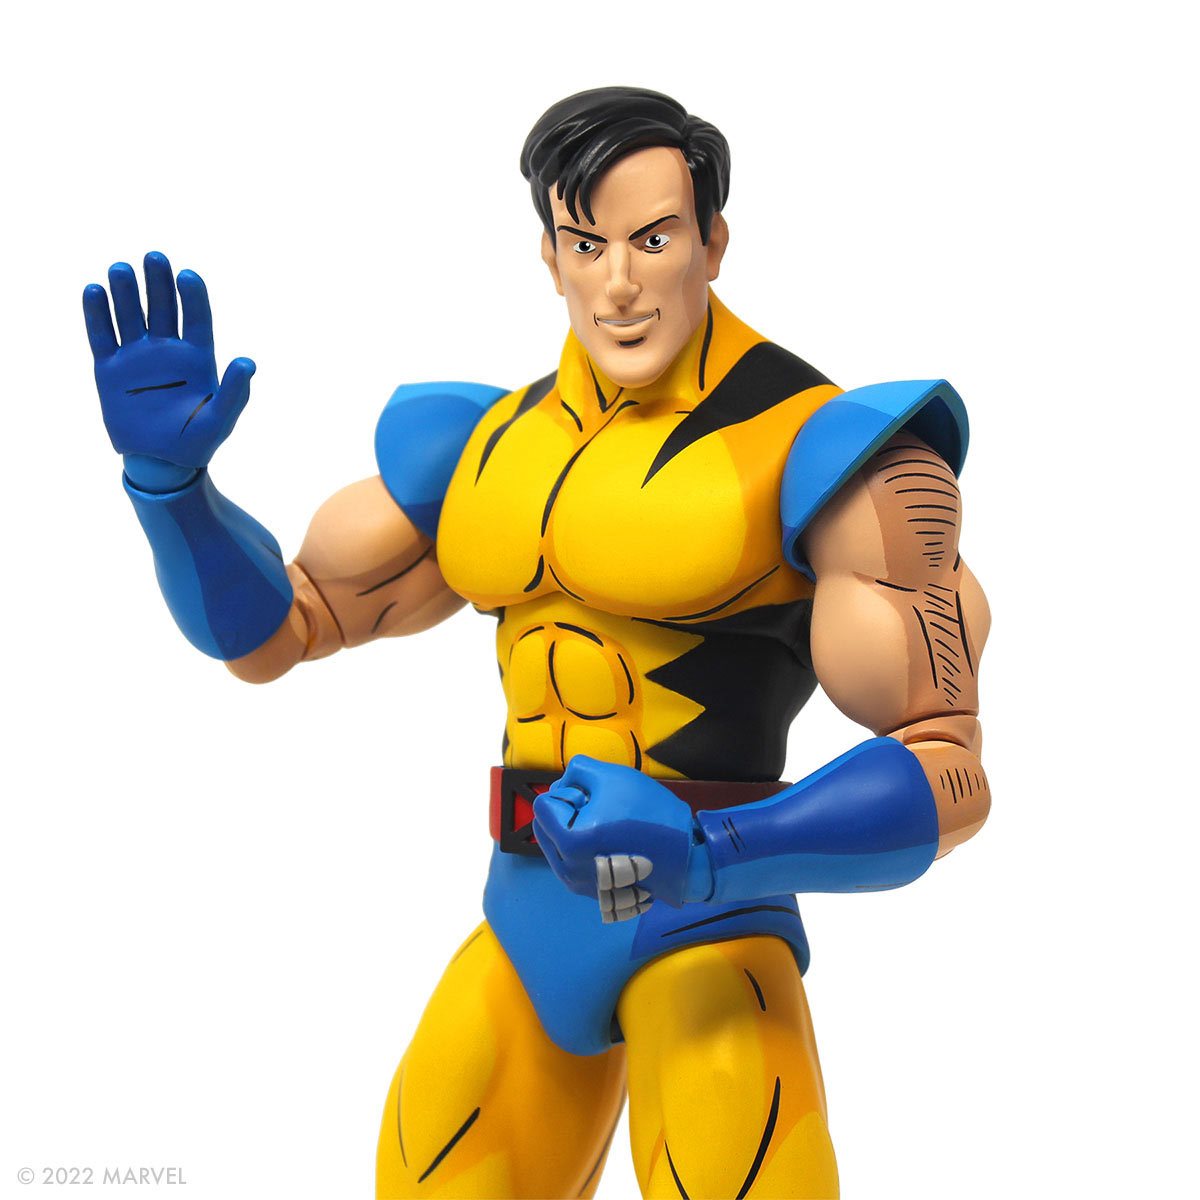 X-Men Animated Series: Wolverine 1/6 Scale Action Figure